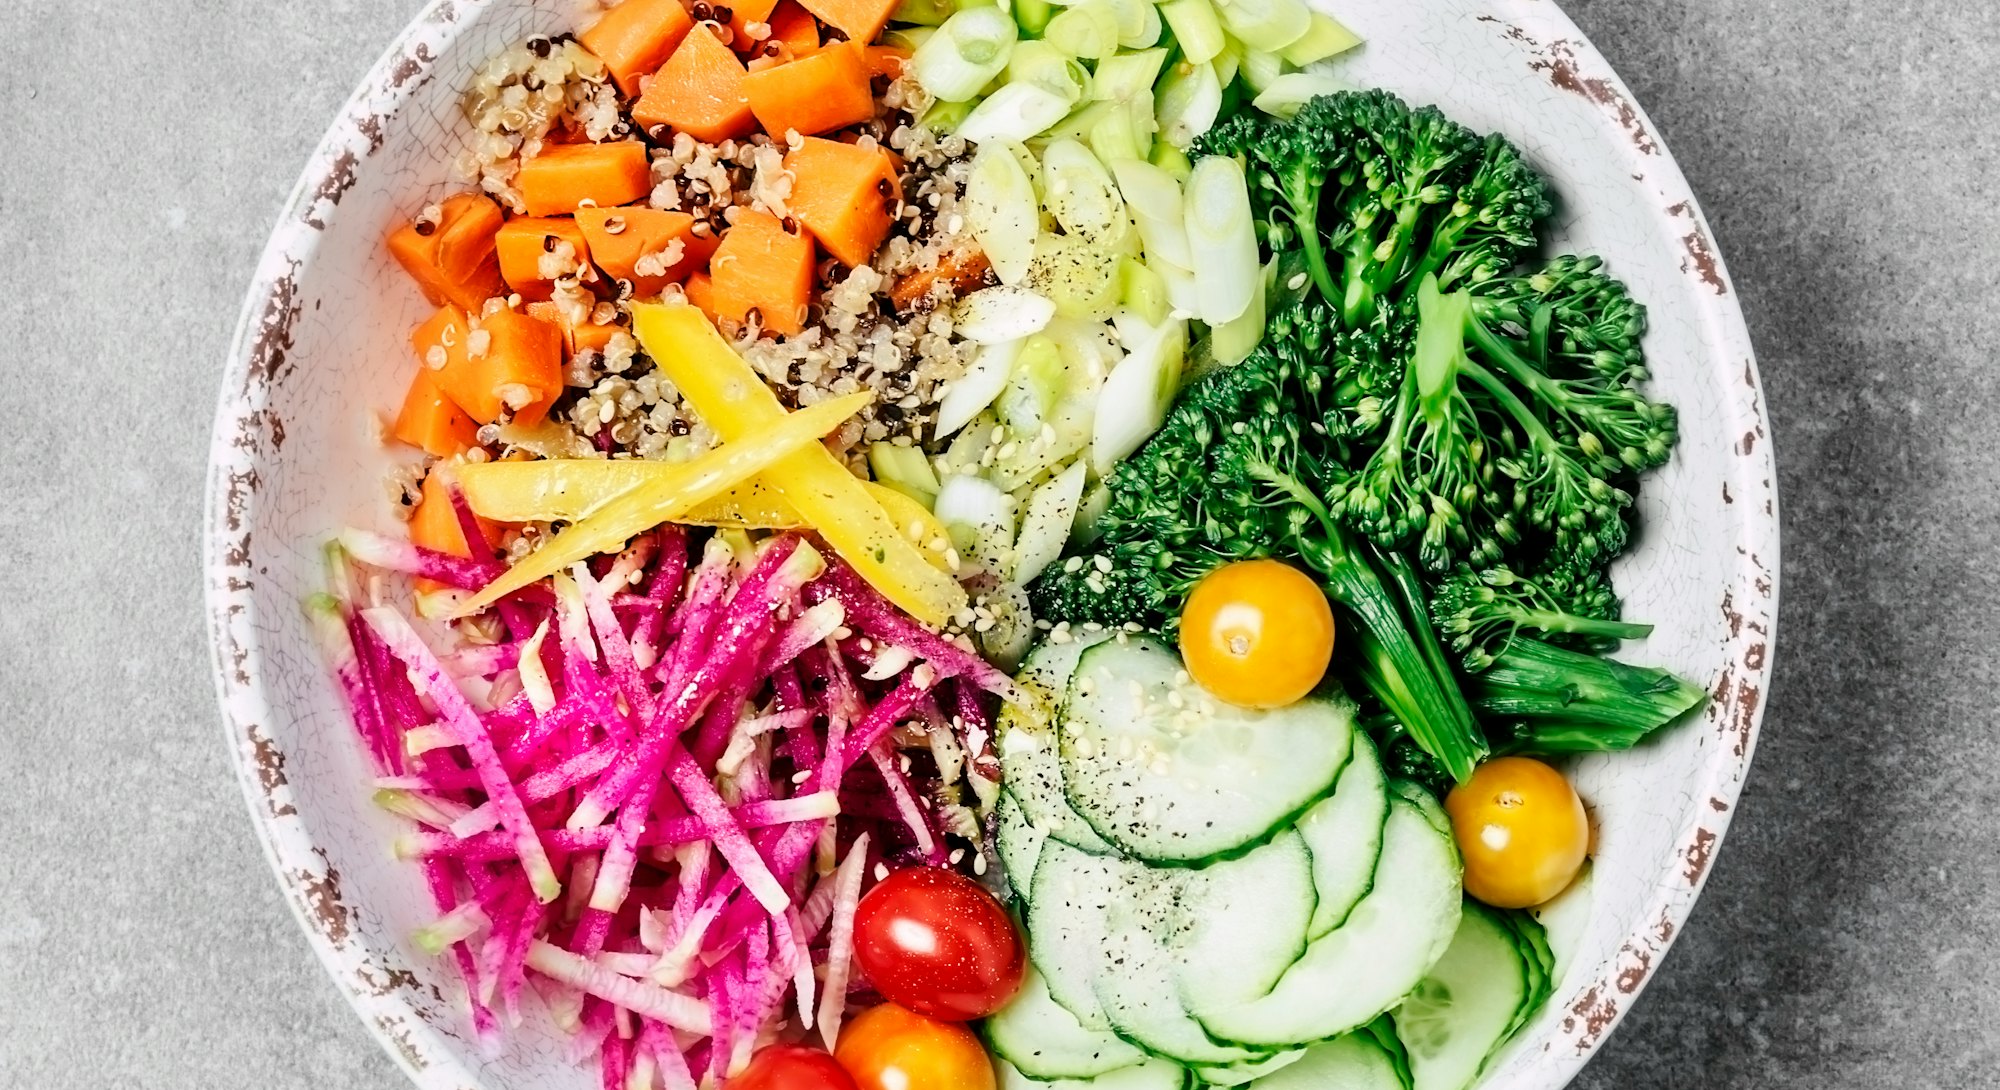 salad featuring sweet potatoes, broccoli, and more is like the popular tik tok salads of today